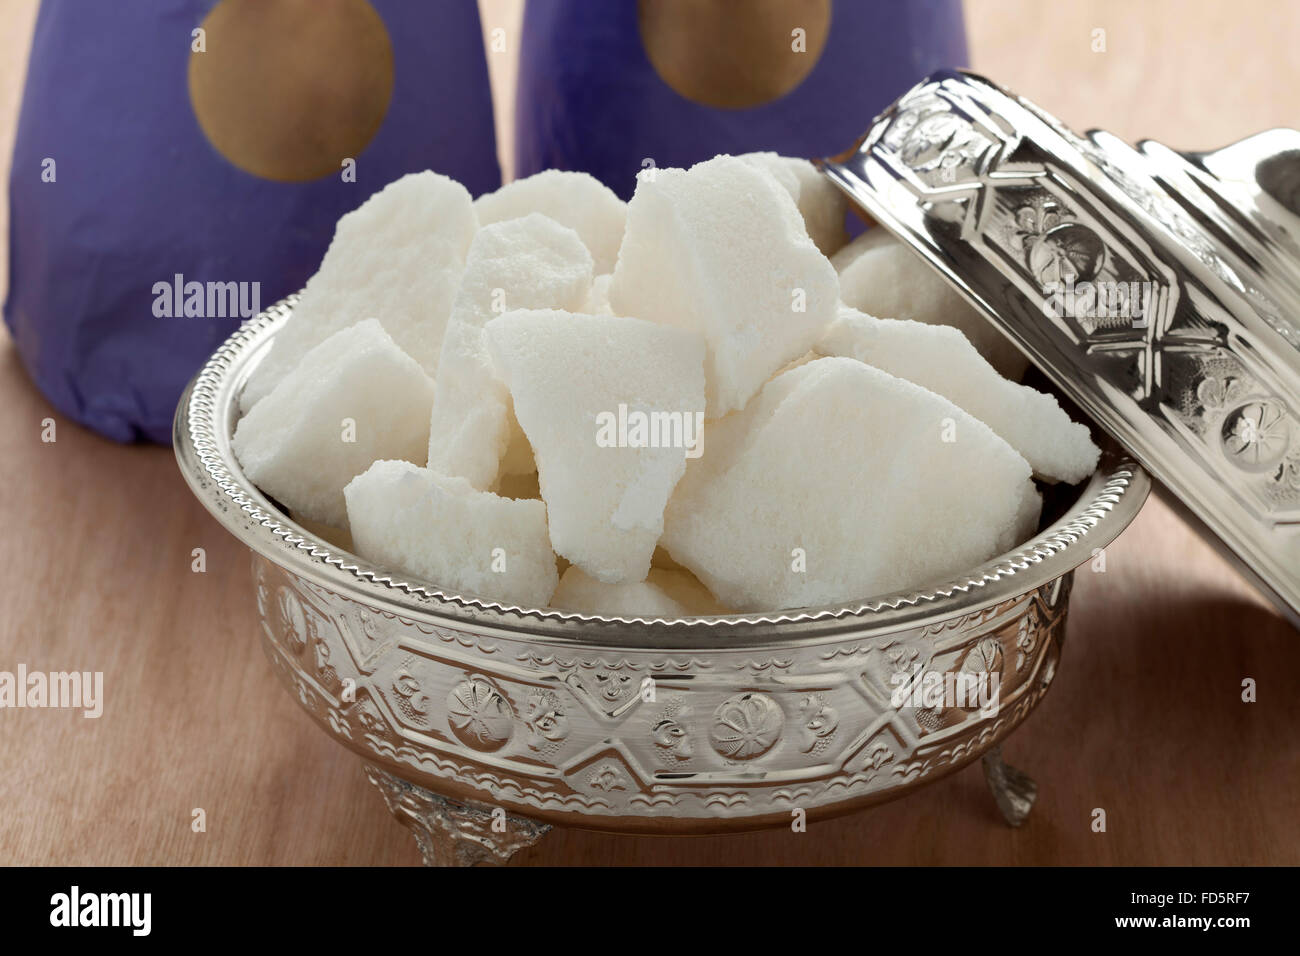 Traditional Moroccan bowl with sugar and sugar cones on the background Stock Photo